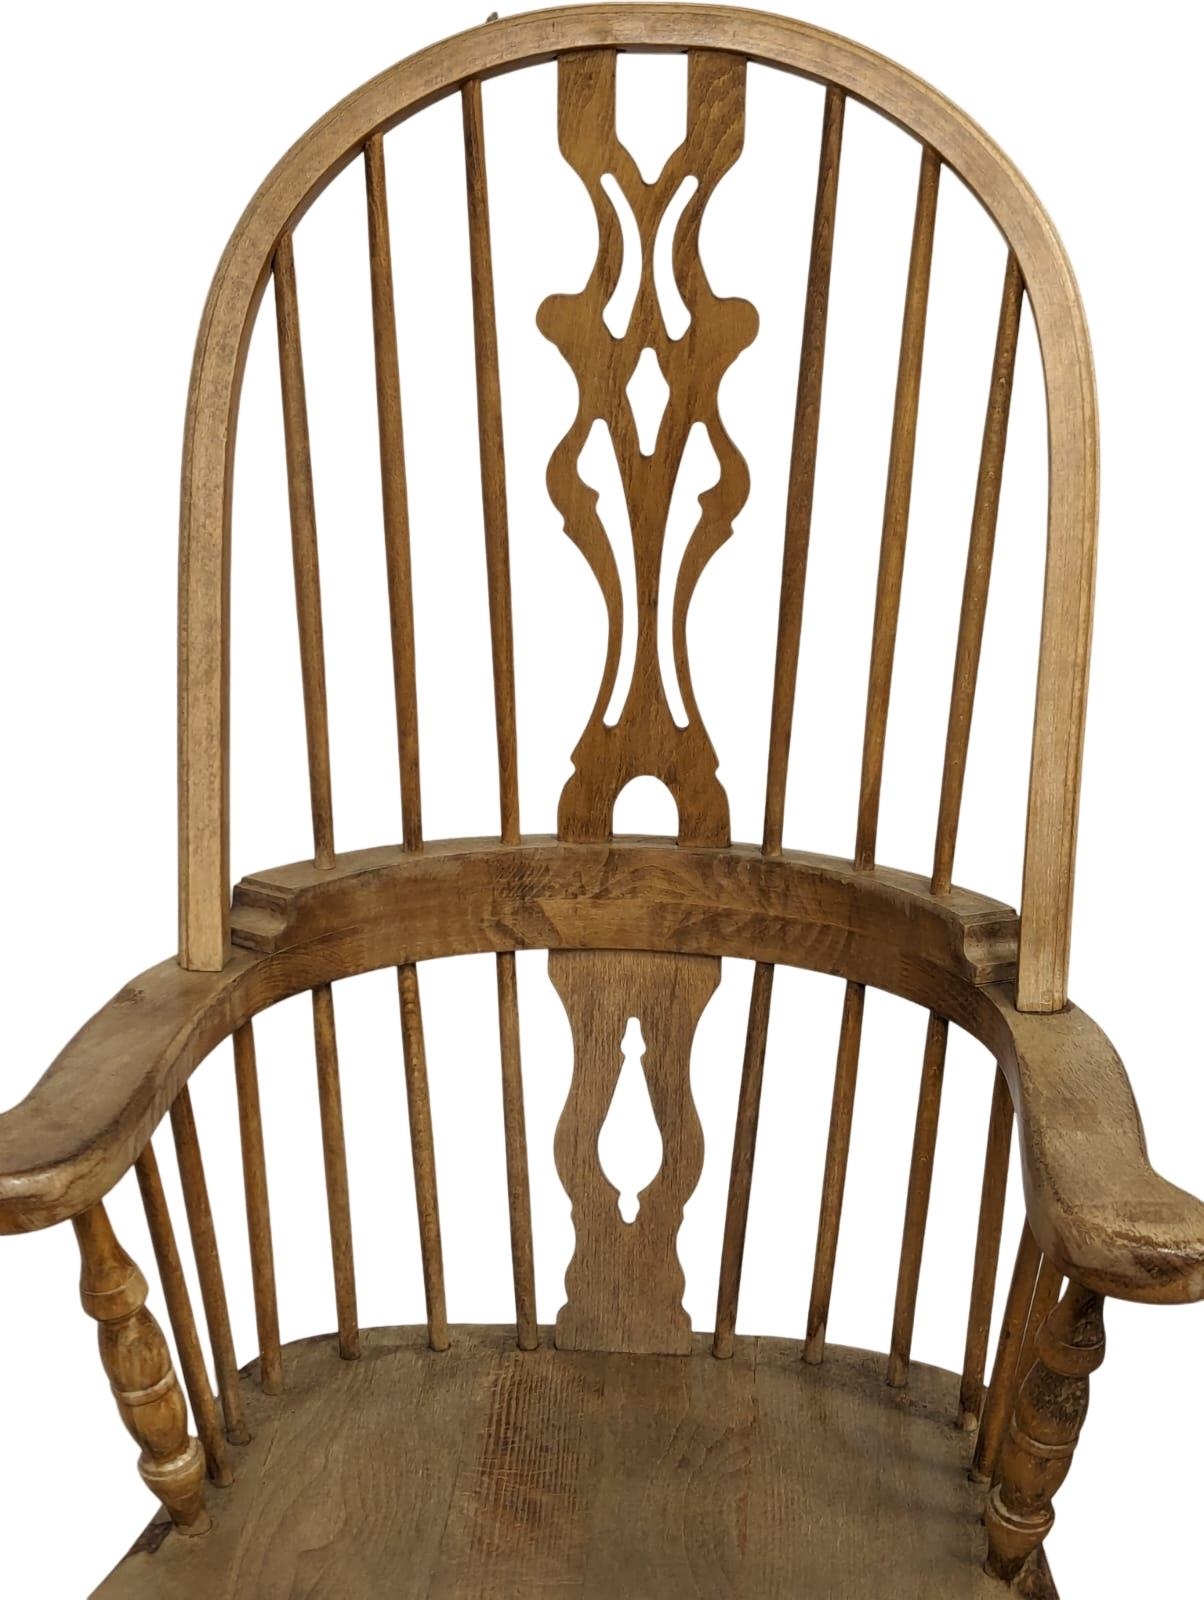 A 19th Century style Windsor armchair. - Image 4 of 4